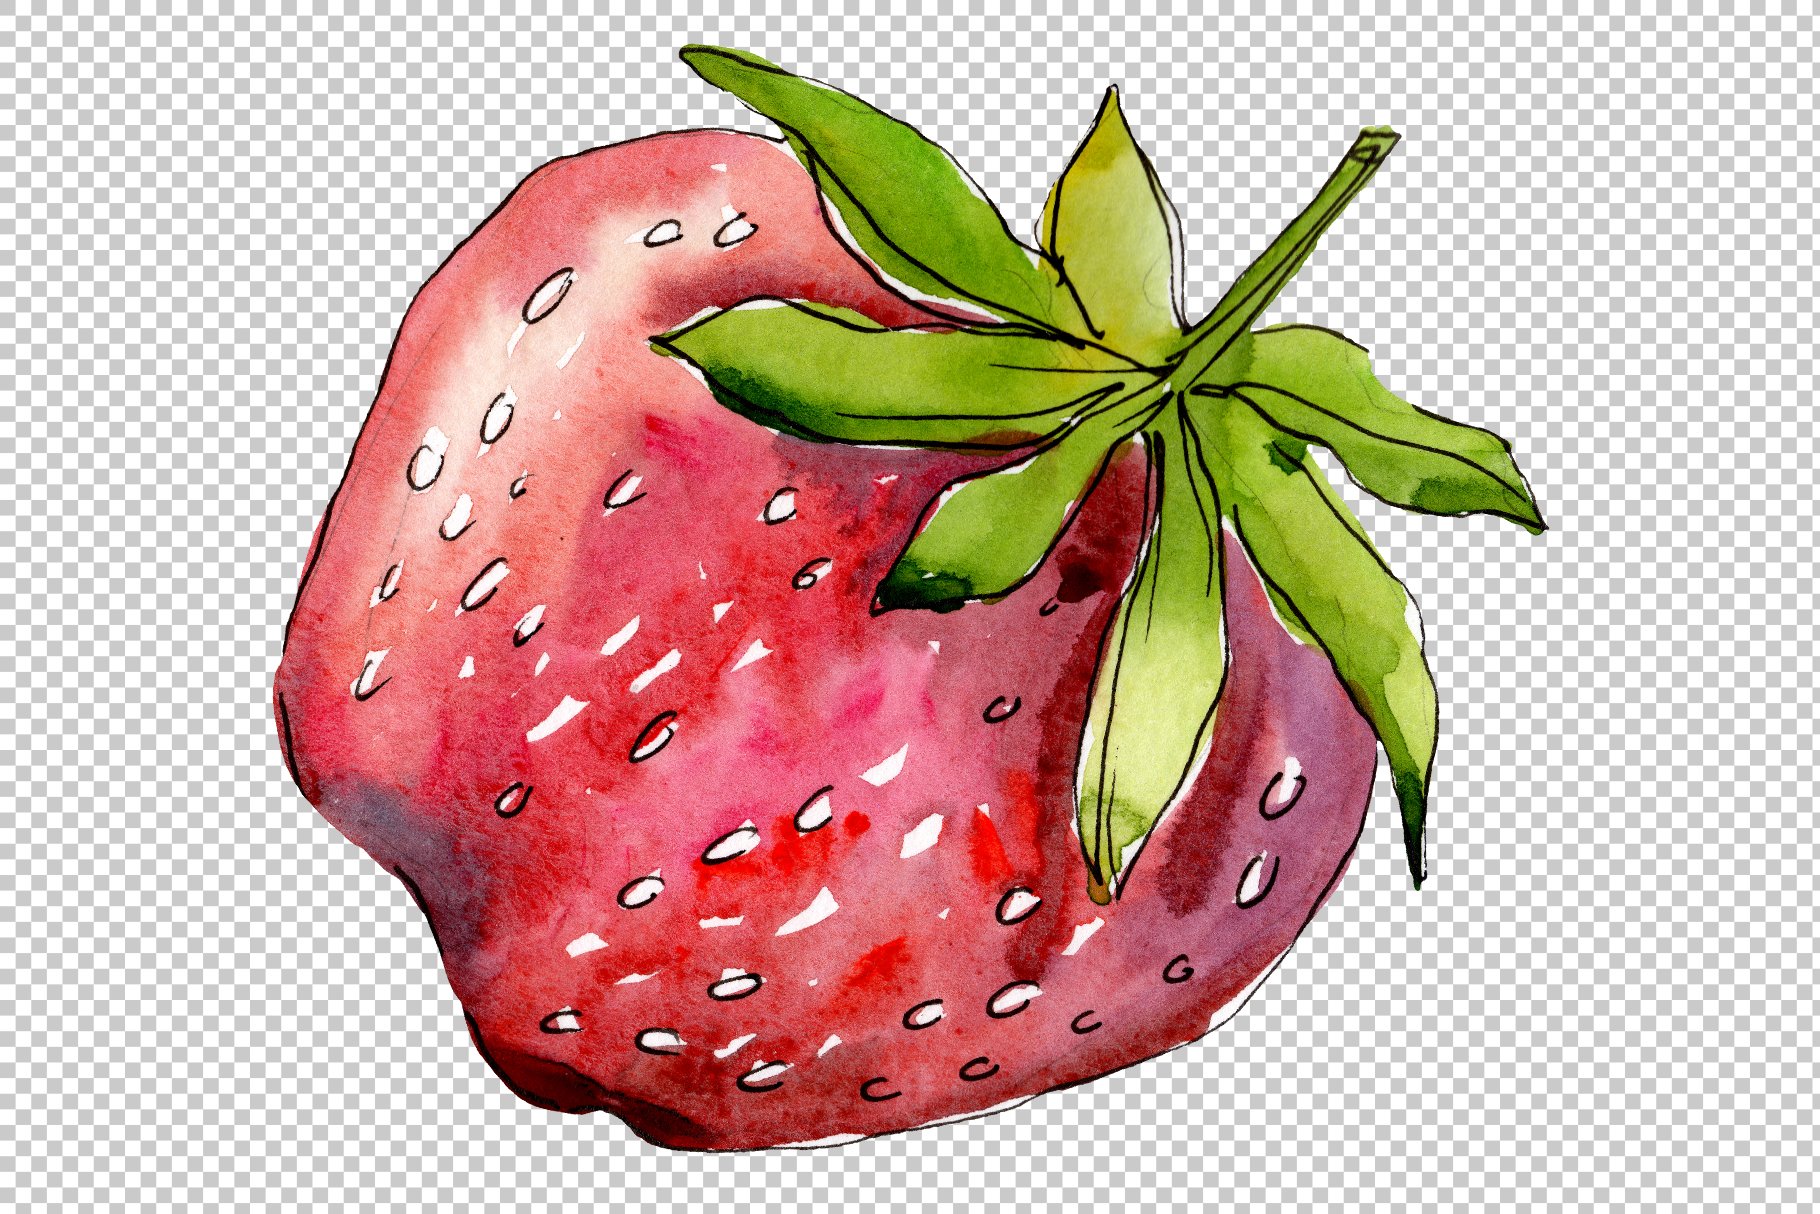 One big strawberry in a watercolor style.